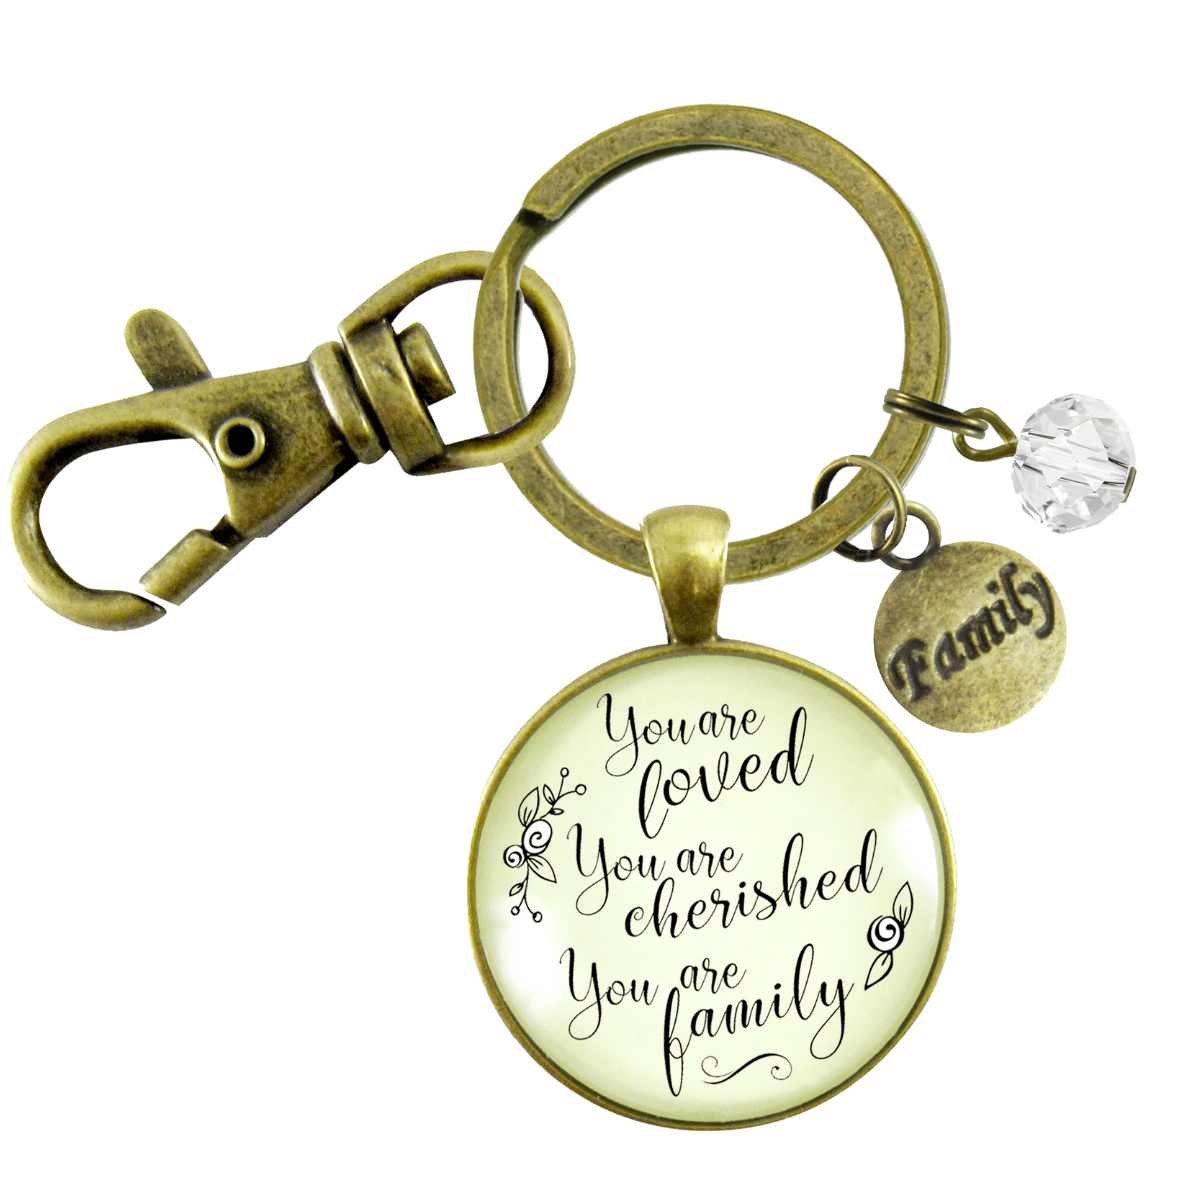 Loving Family Keychain You are Cherished Meaningful Gift Jewelry - Gutsy Goodness Handmade Jewelry;Loving Family Keychain You Are Cherished Meaningful Gift Jewelry - Gutsy Goodness Handmade Jewelry Gifts